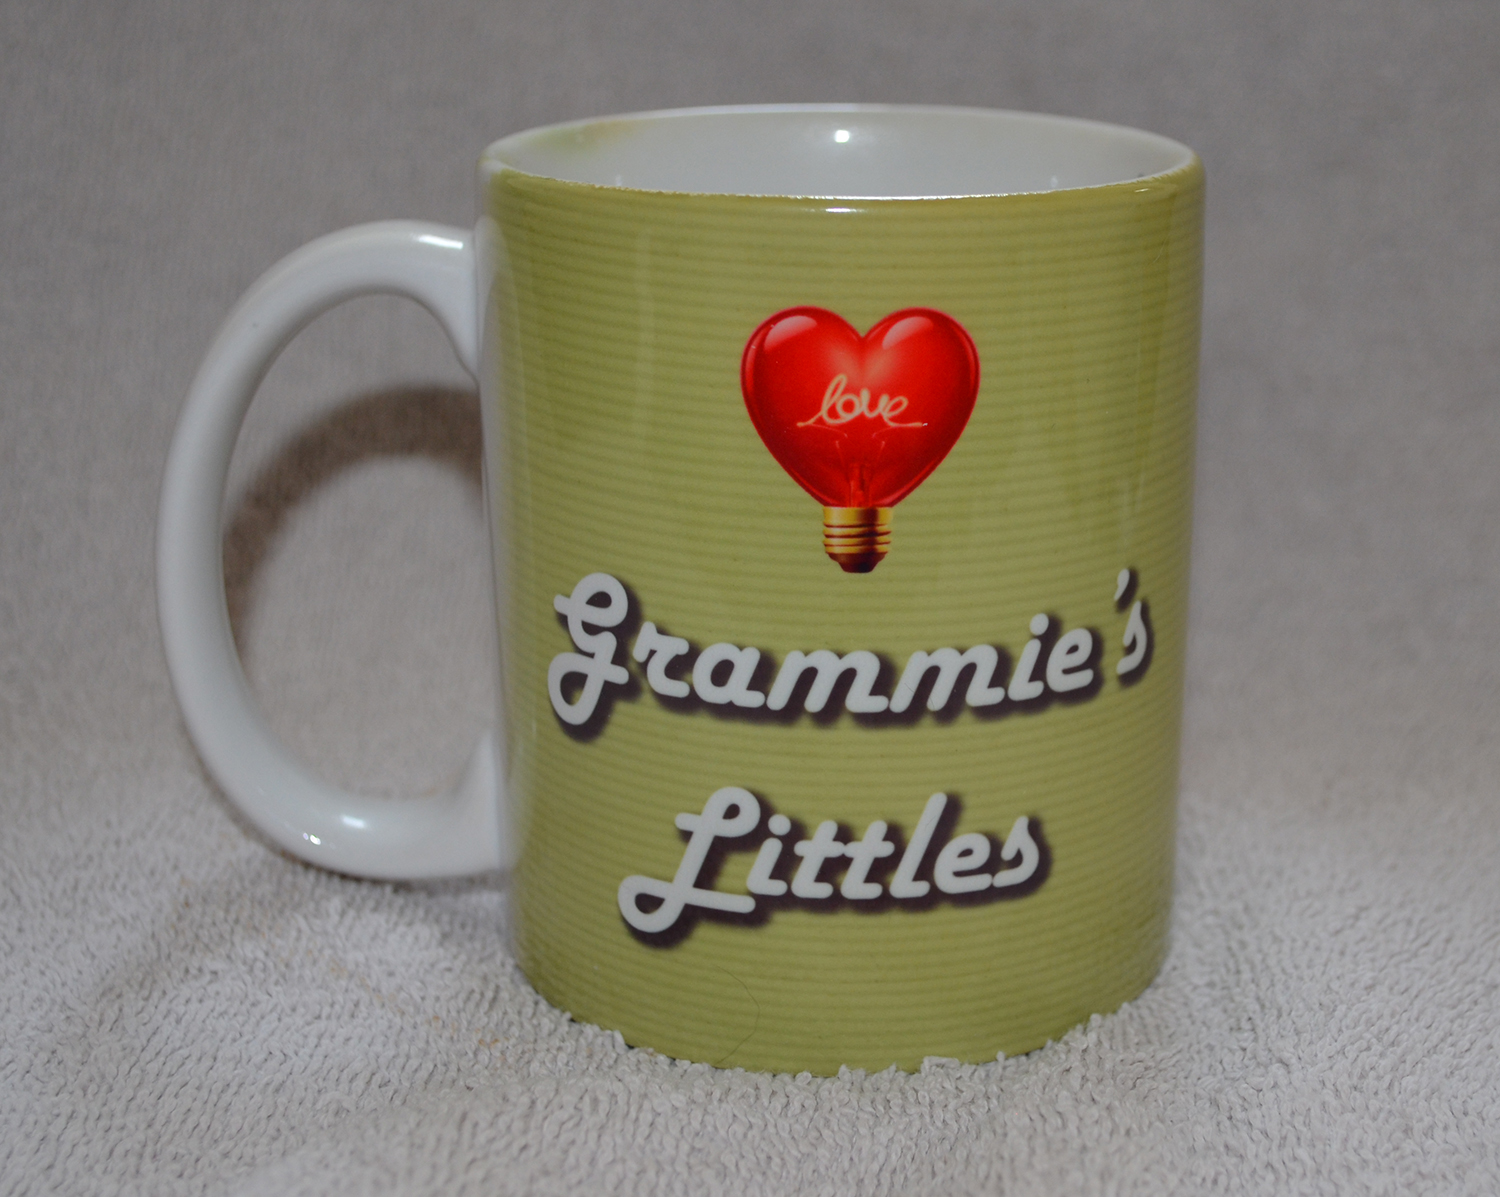 Grammie Mugs made with sublimation printing